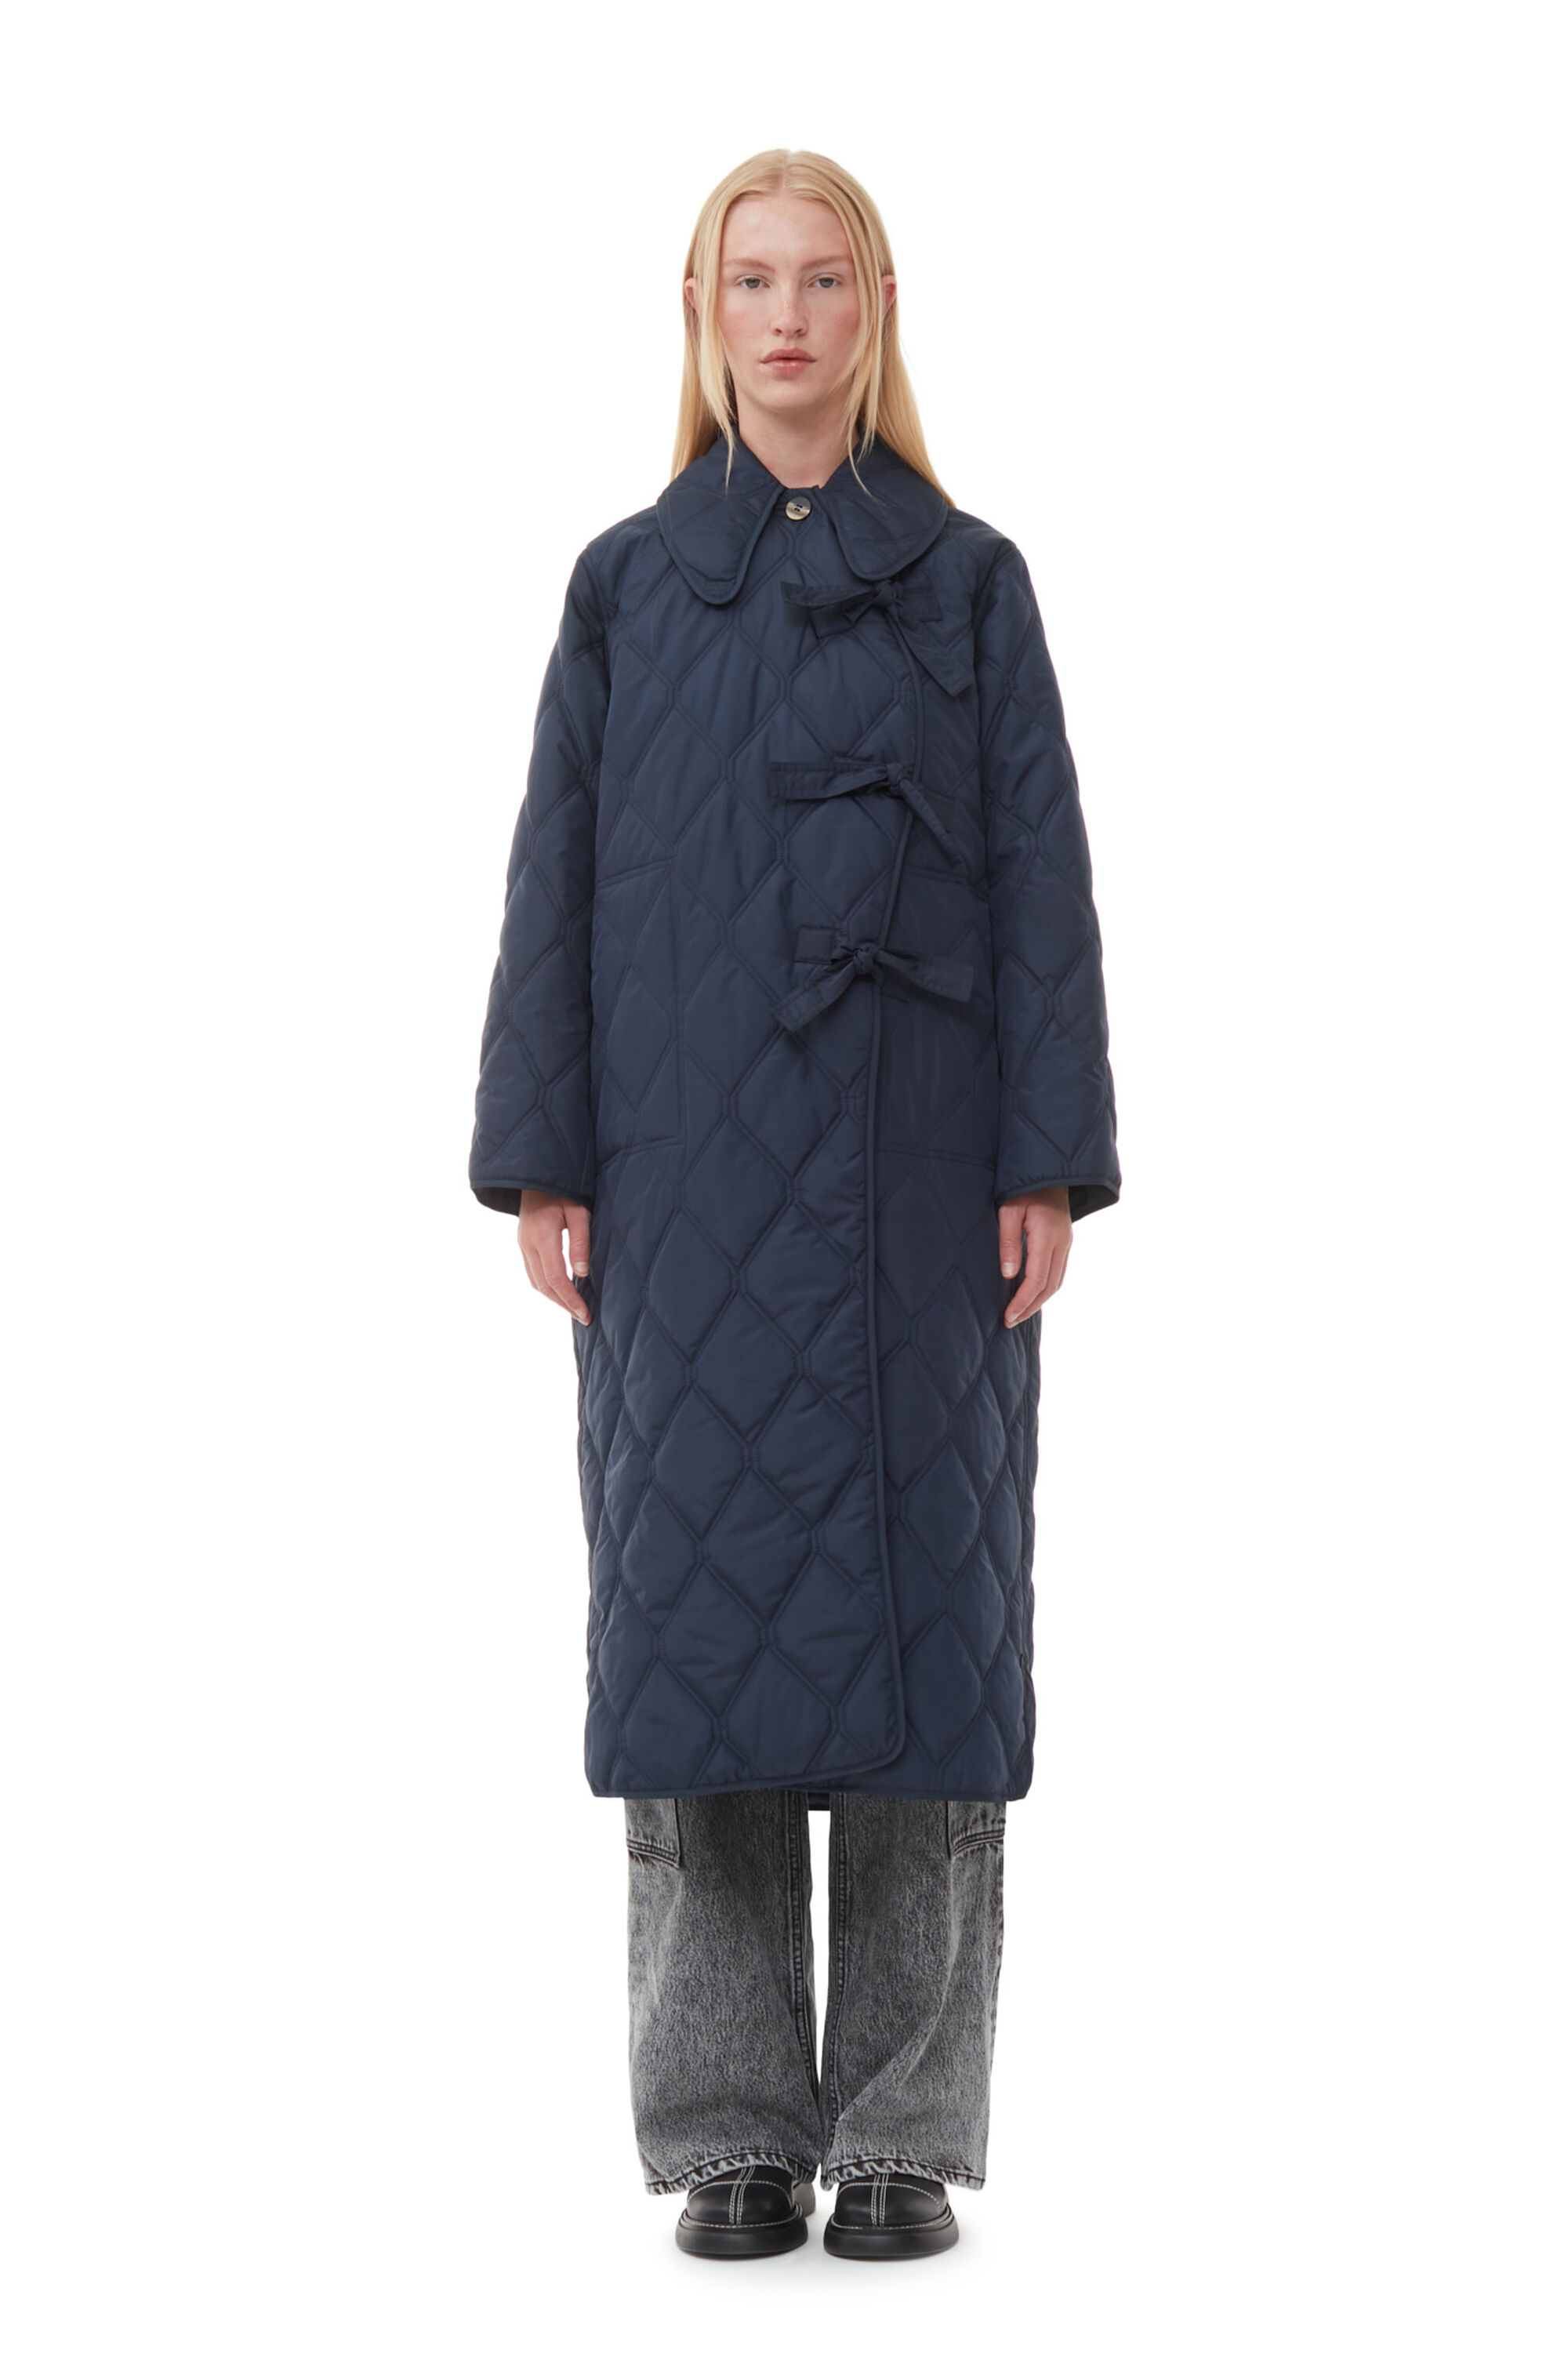 The 18 Best Quilted Jackets for Women to Buy This Winter | Who What Wear UK